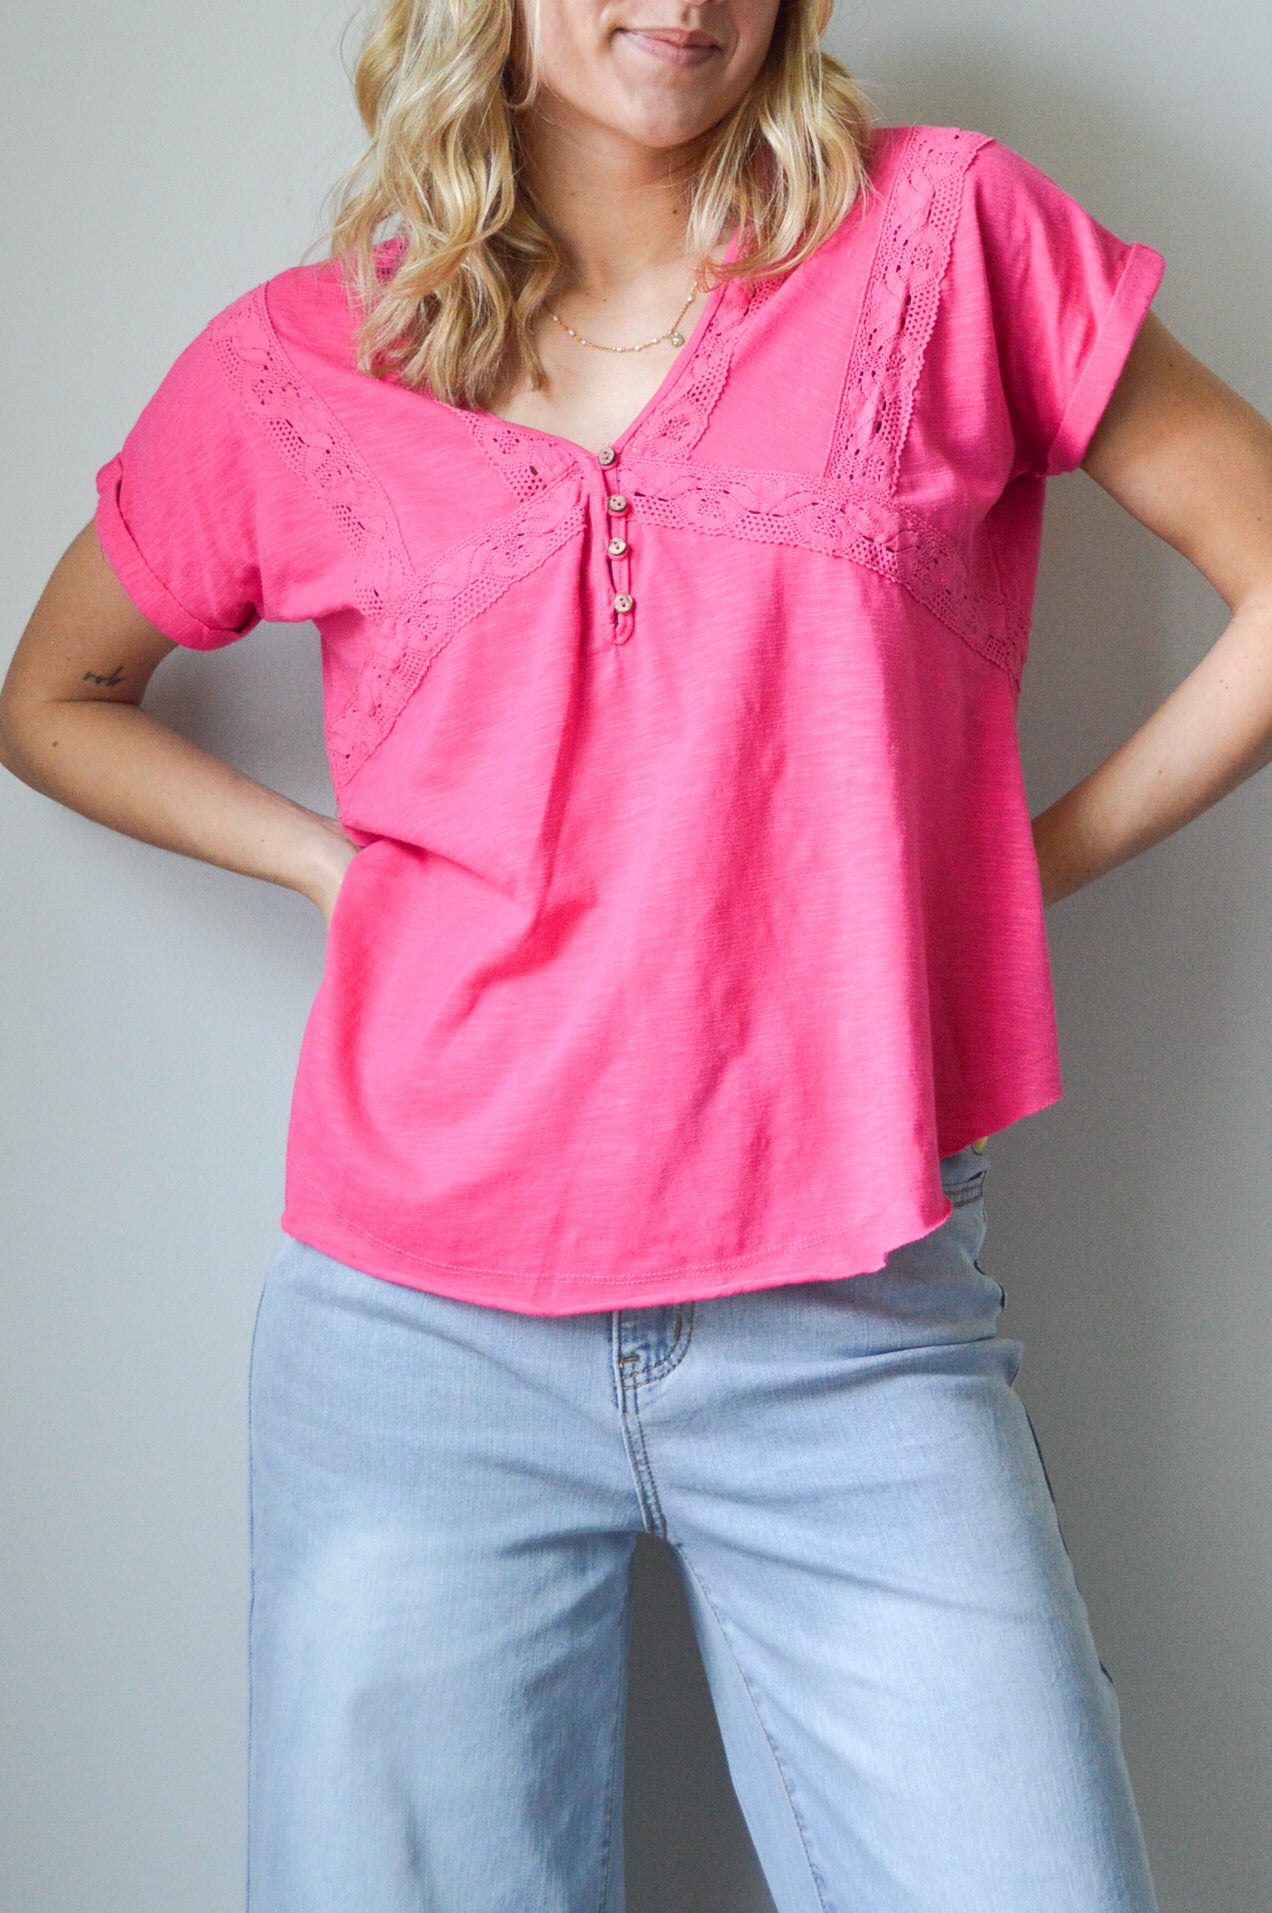 astrid hot pink lace top